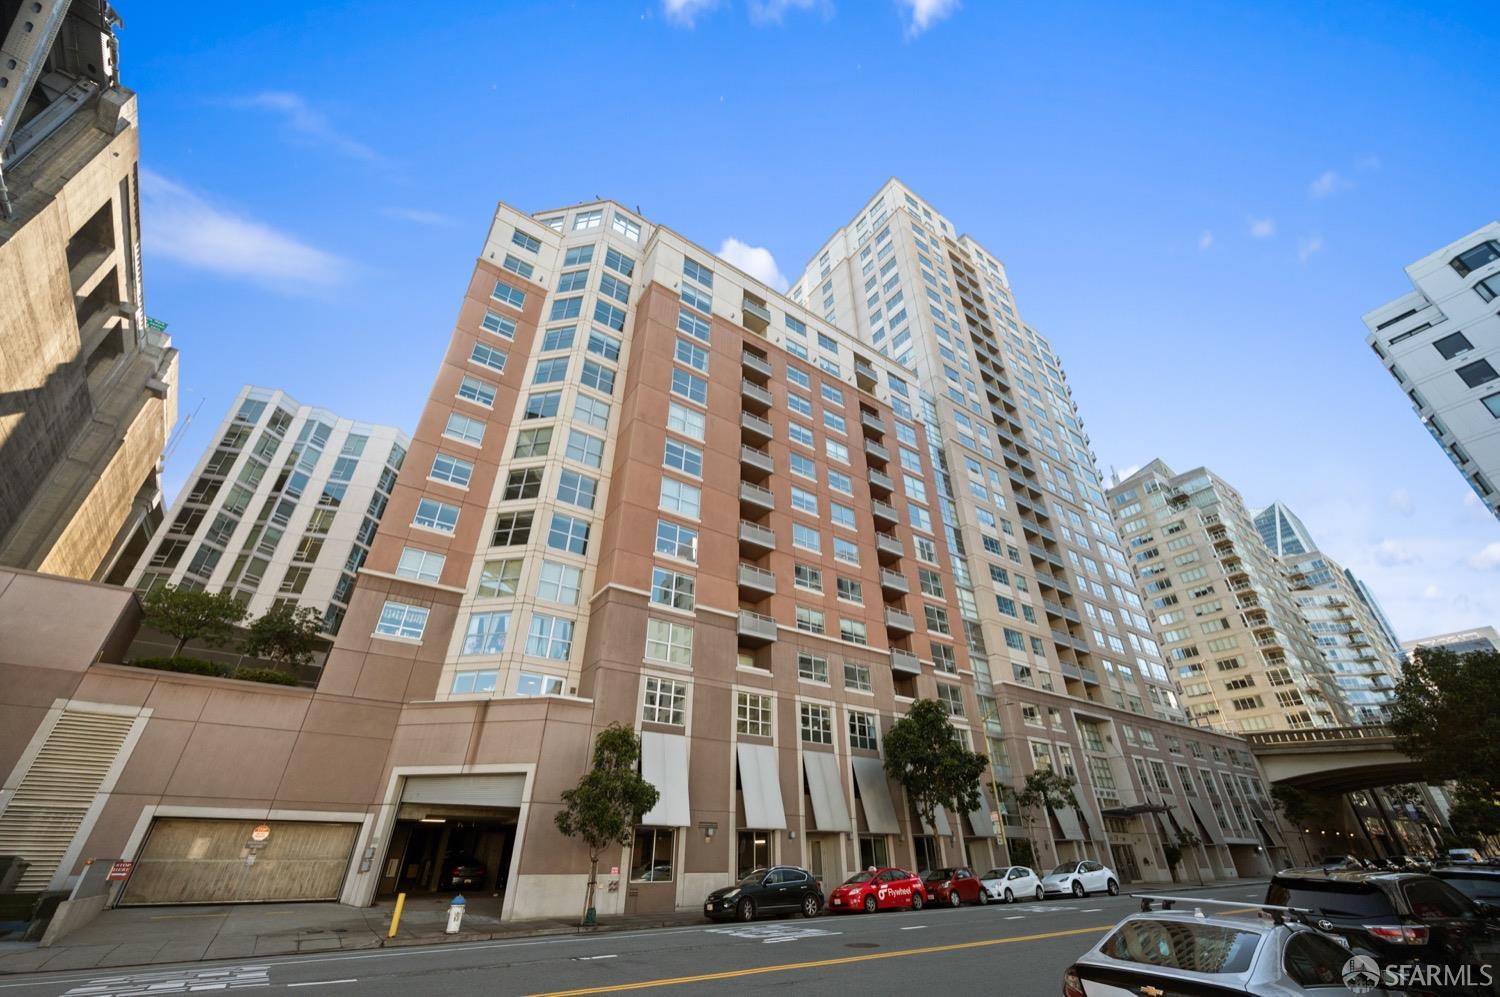 Photo of 400 Beale St #707 in San Francisco, CA